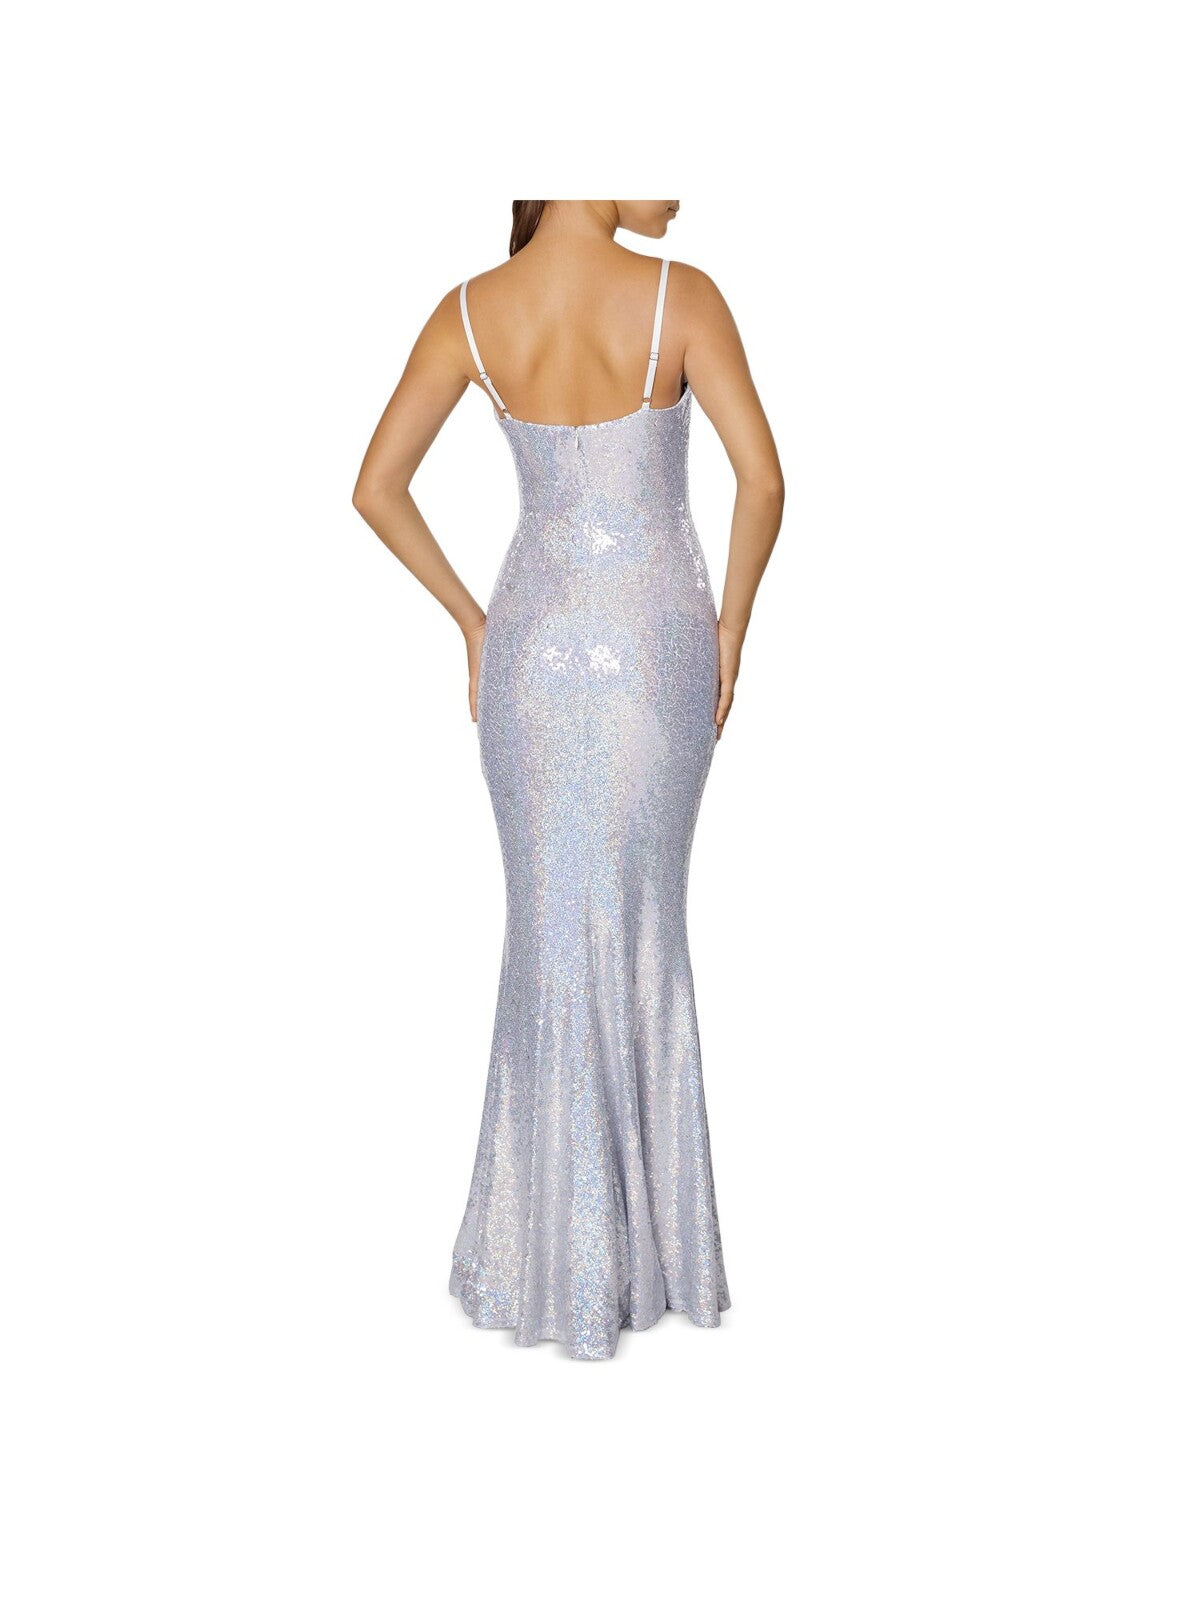 LAUNDRY Womens Silver Stretch Sequined Zippered Adjustable Straps Lined Sleeveless Cowl Neck Full-Length Formal Mermaid Dress 8